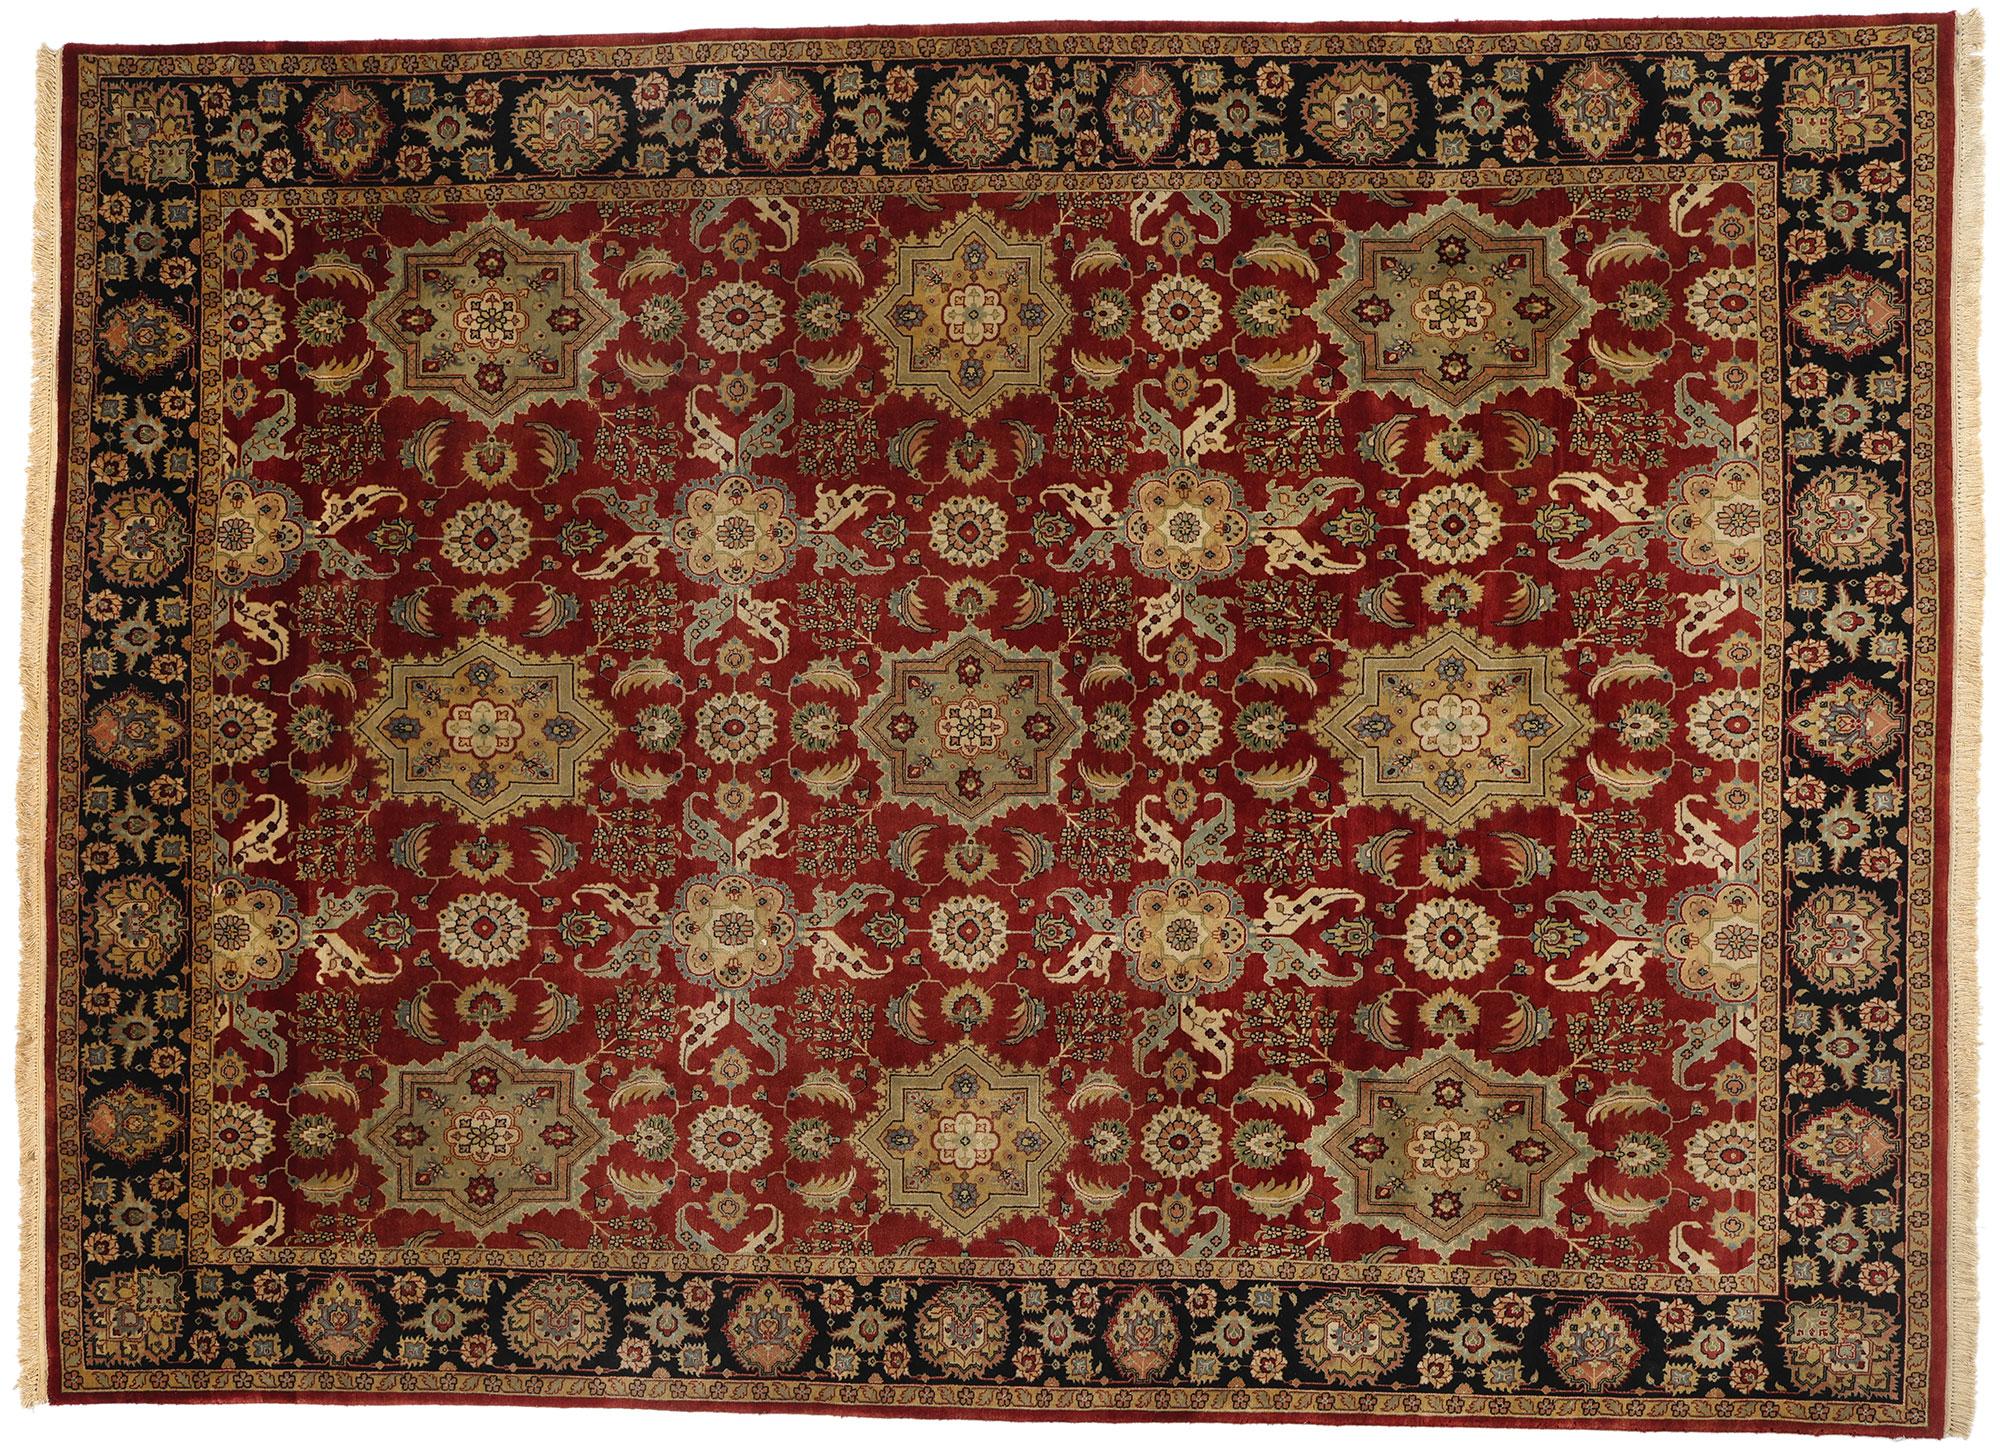 78736 Vintage Modern Indian Mogul Rug, 09'00 x 12'03. Contemporary Mogul style rugs are modern reinterpretations of Indian carpets from the Mughal era, blending traditional craftsmanship with present-time aesthetics, updated color palettes, and